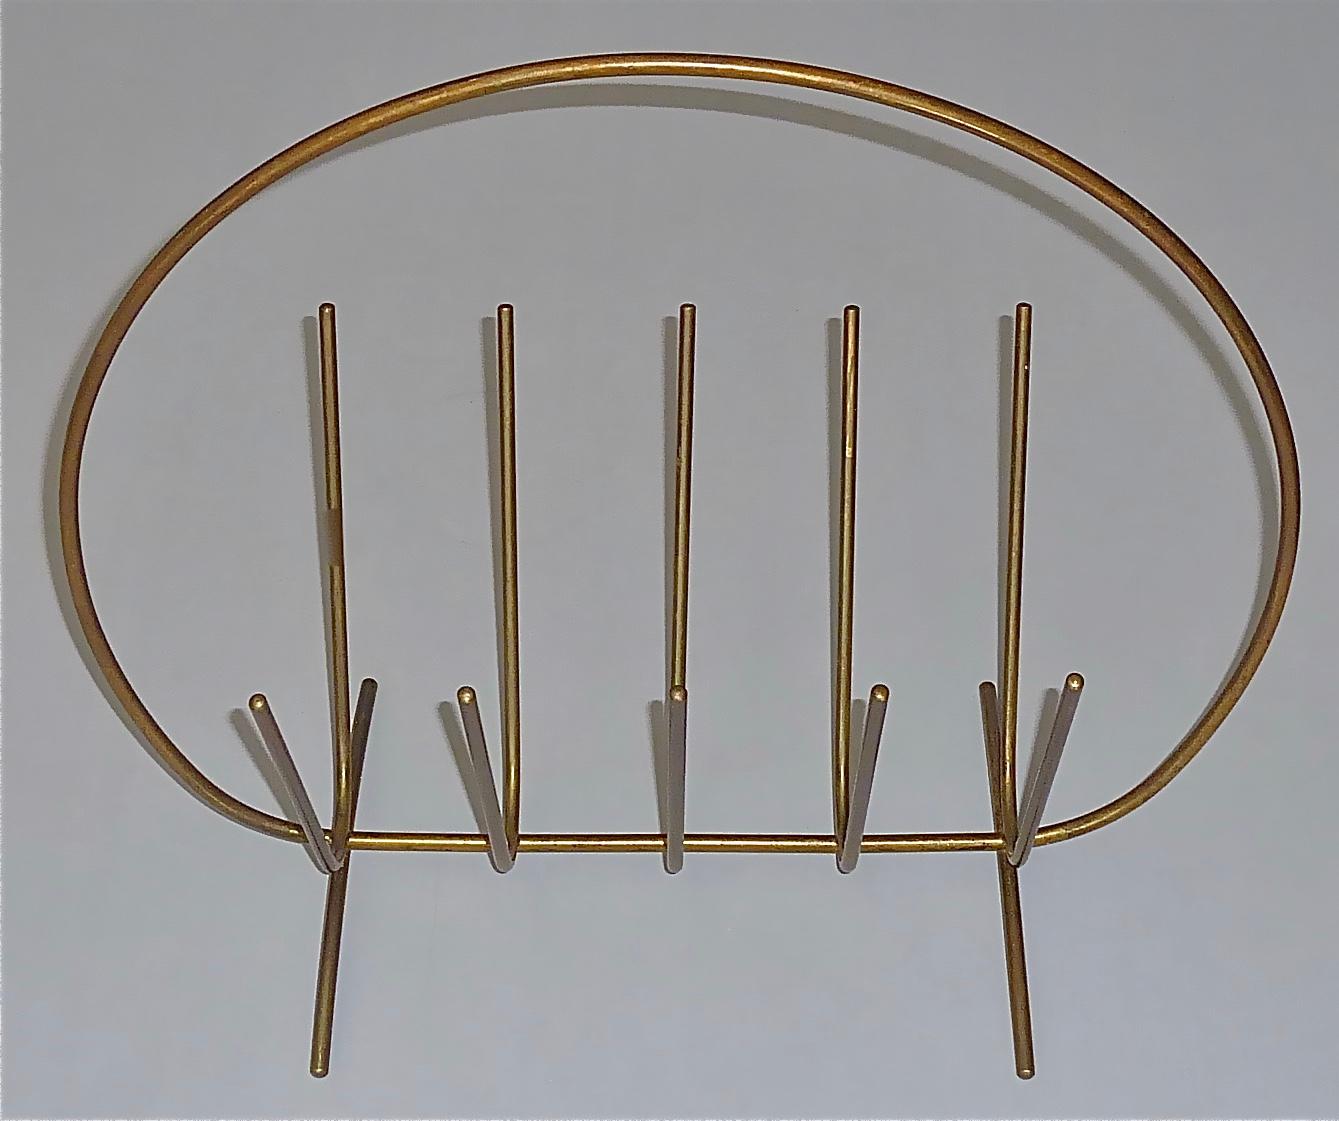 Rare modernist Austrian magazine rack or stand which probably belongs to one of the beautiful designs by Aubock, Hagenauer, Josef Frank for Haus & Garten or Kalmar, Austria 1950s. The elegant minimalist and reduced to simplicity magazine rack is